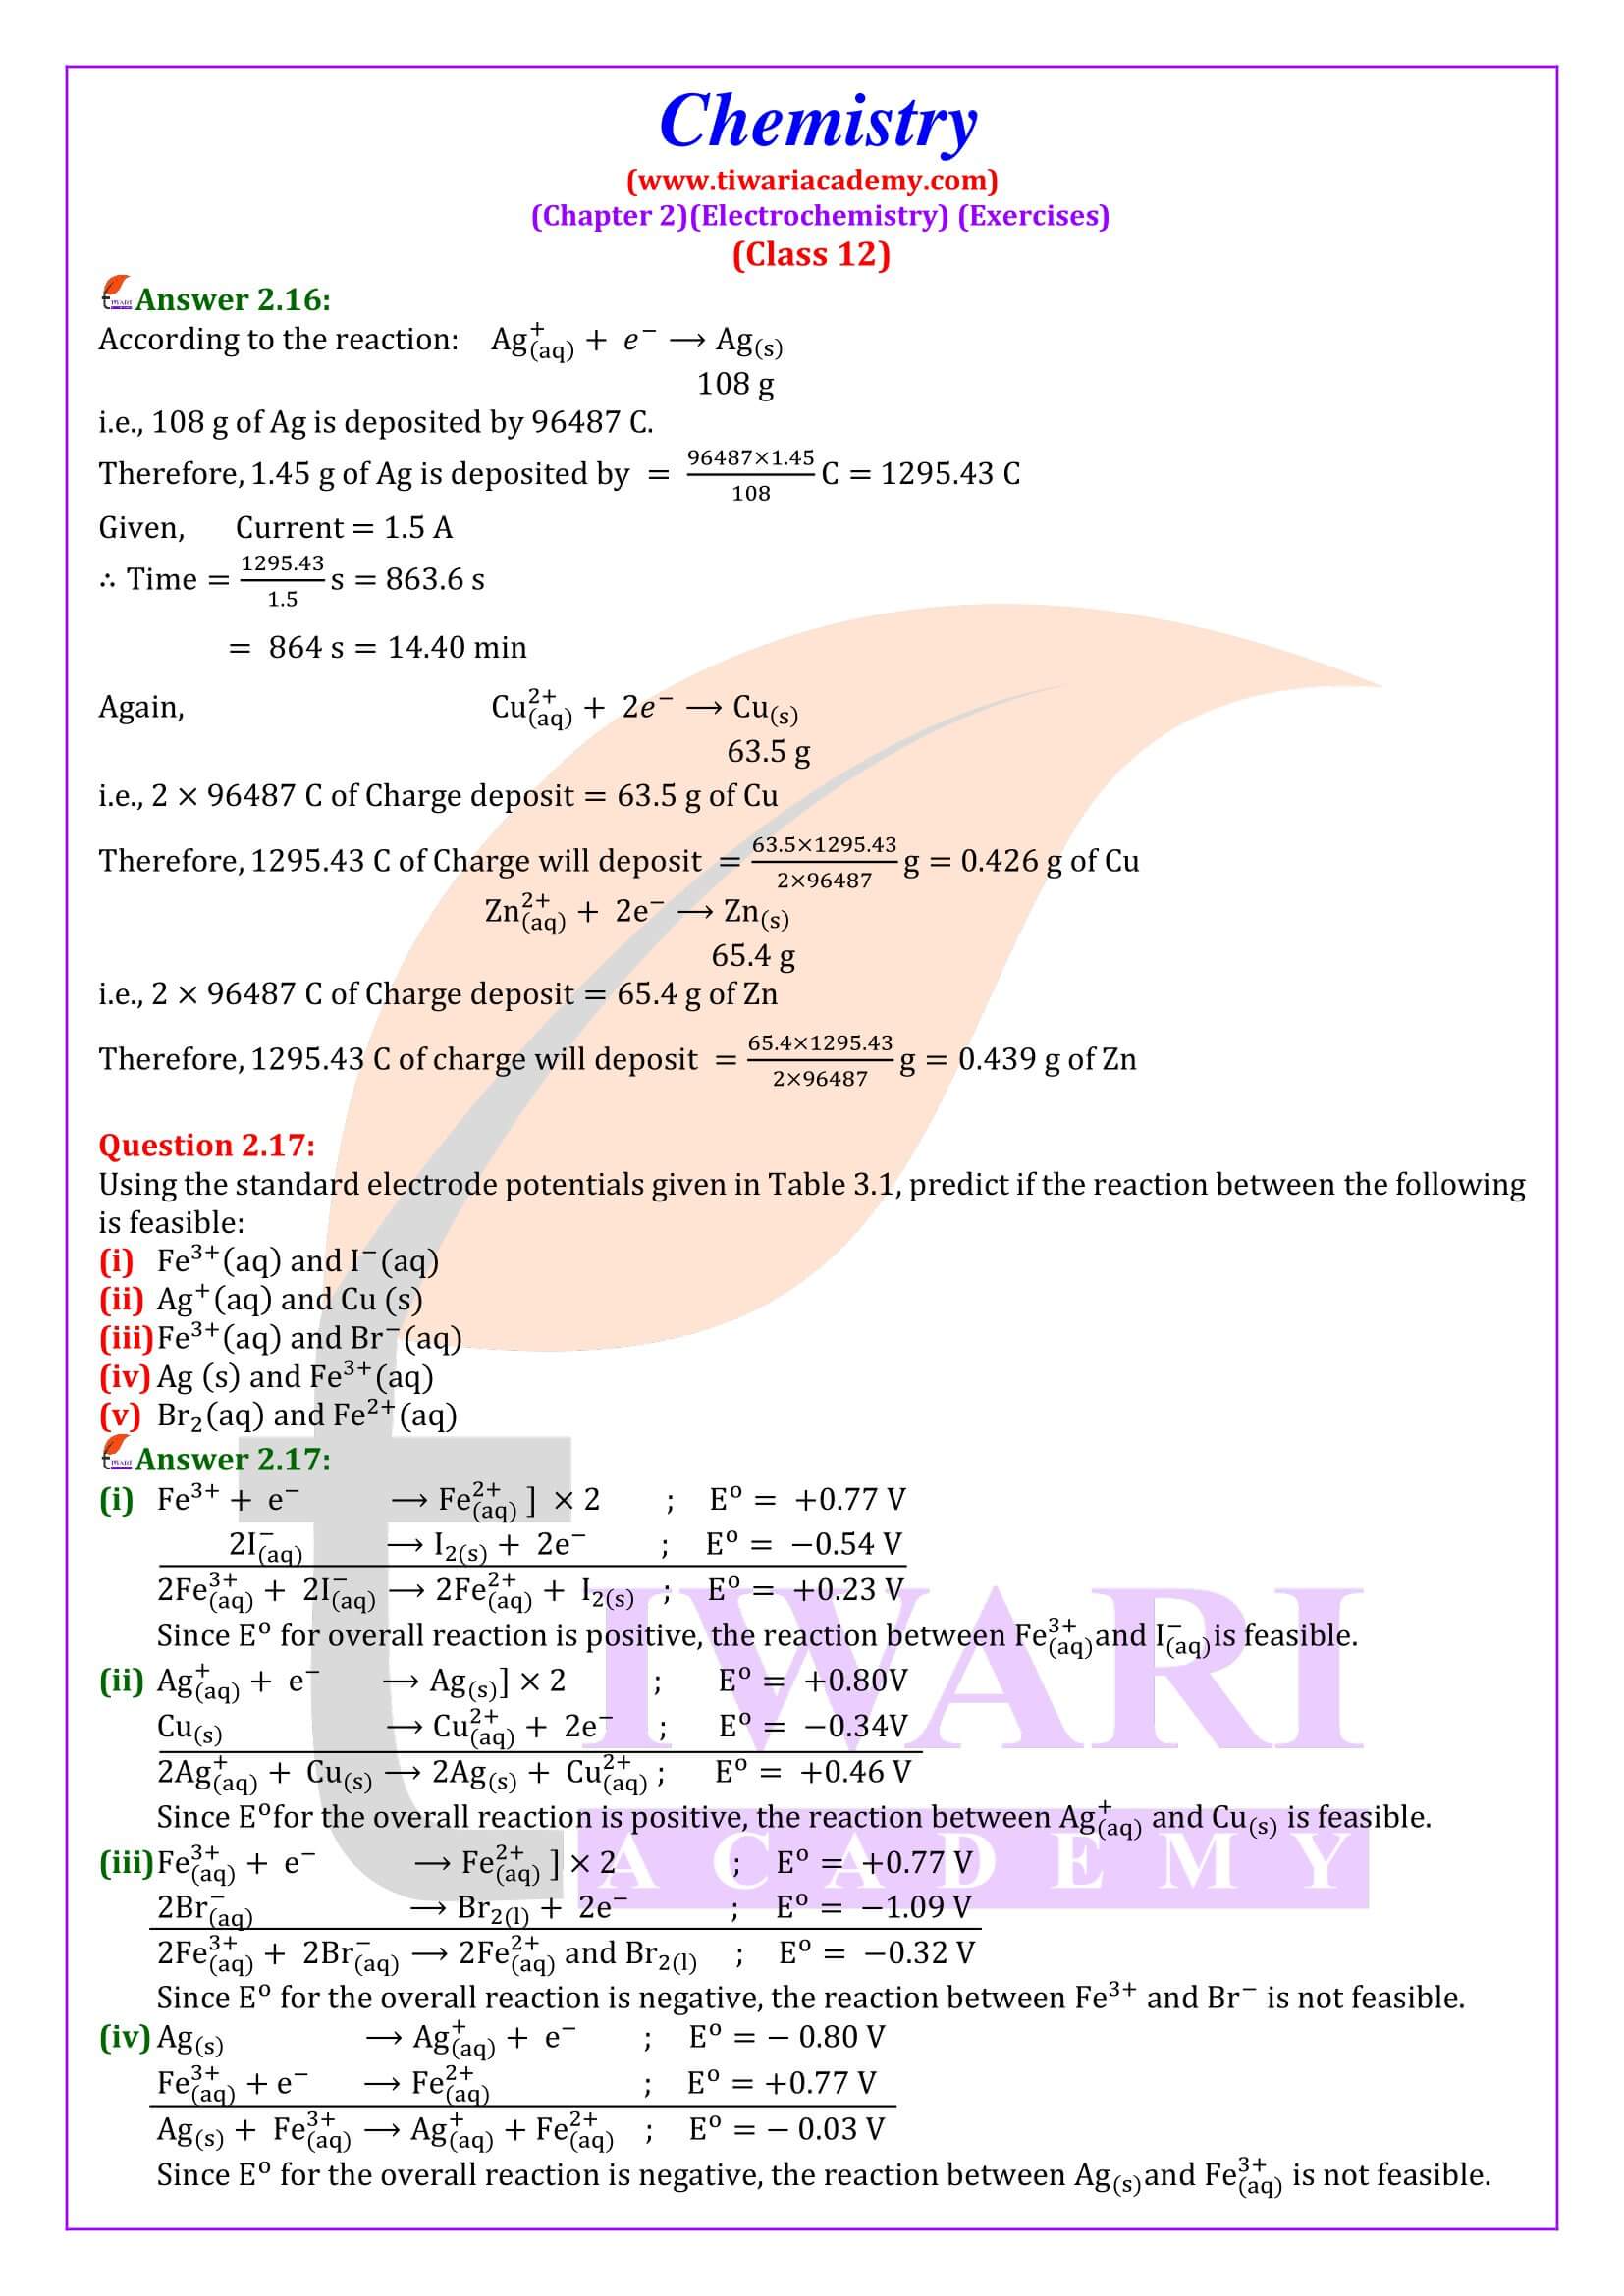 NCERT Solutions for Class 12 Chemistry Chapter 2 guide